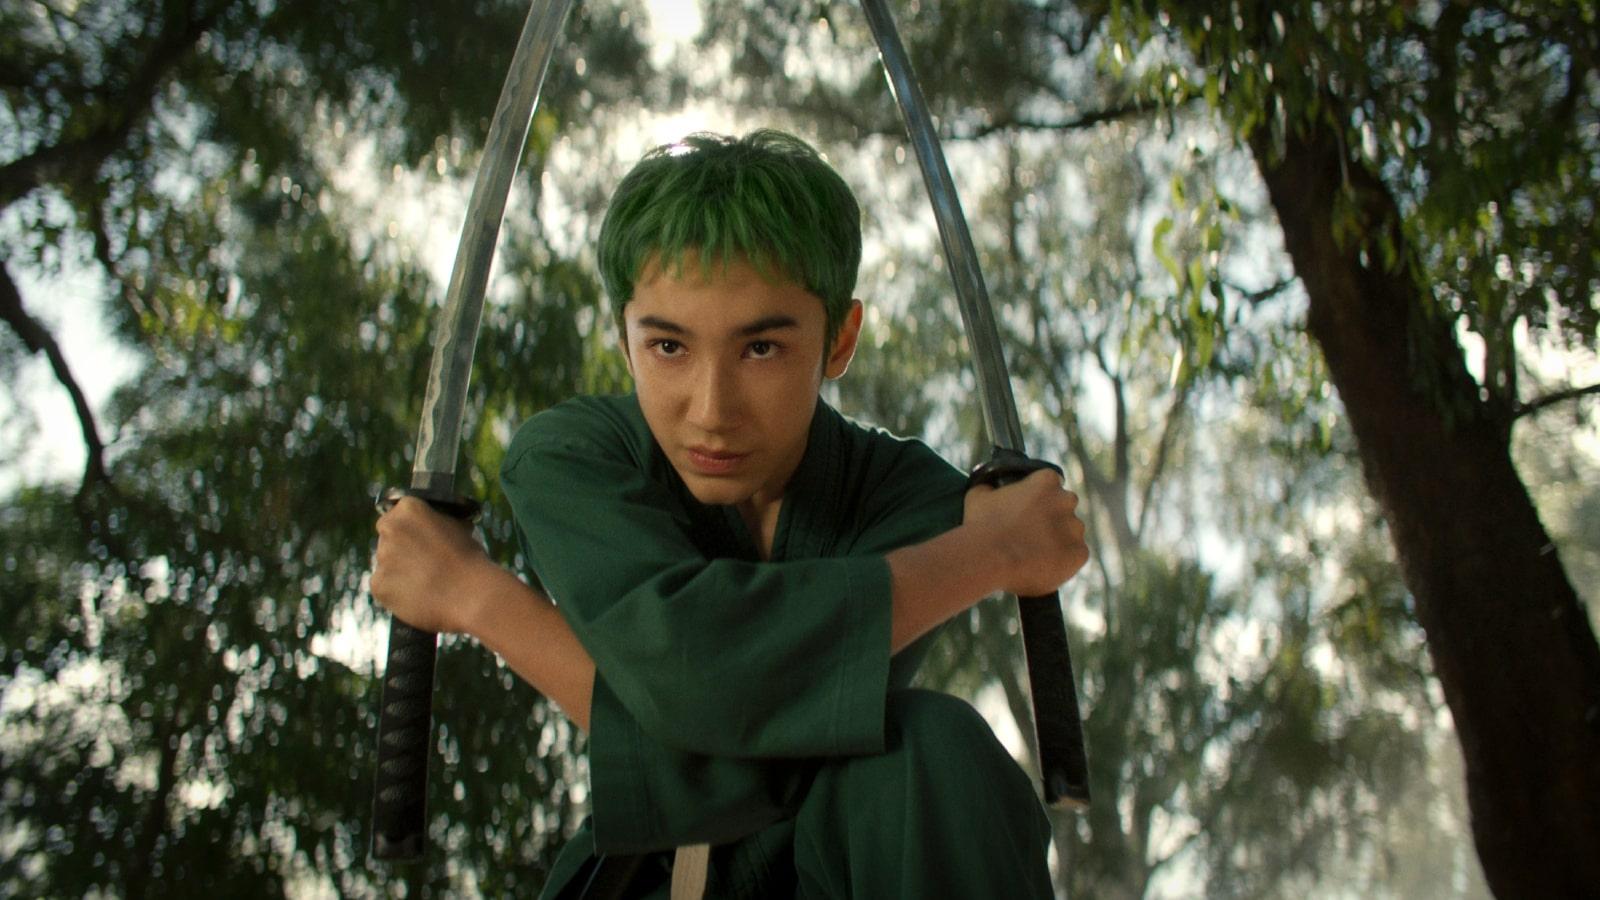 Young Zoro played by Maximilian Lee Piazza